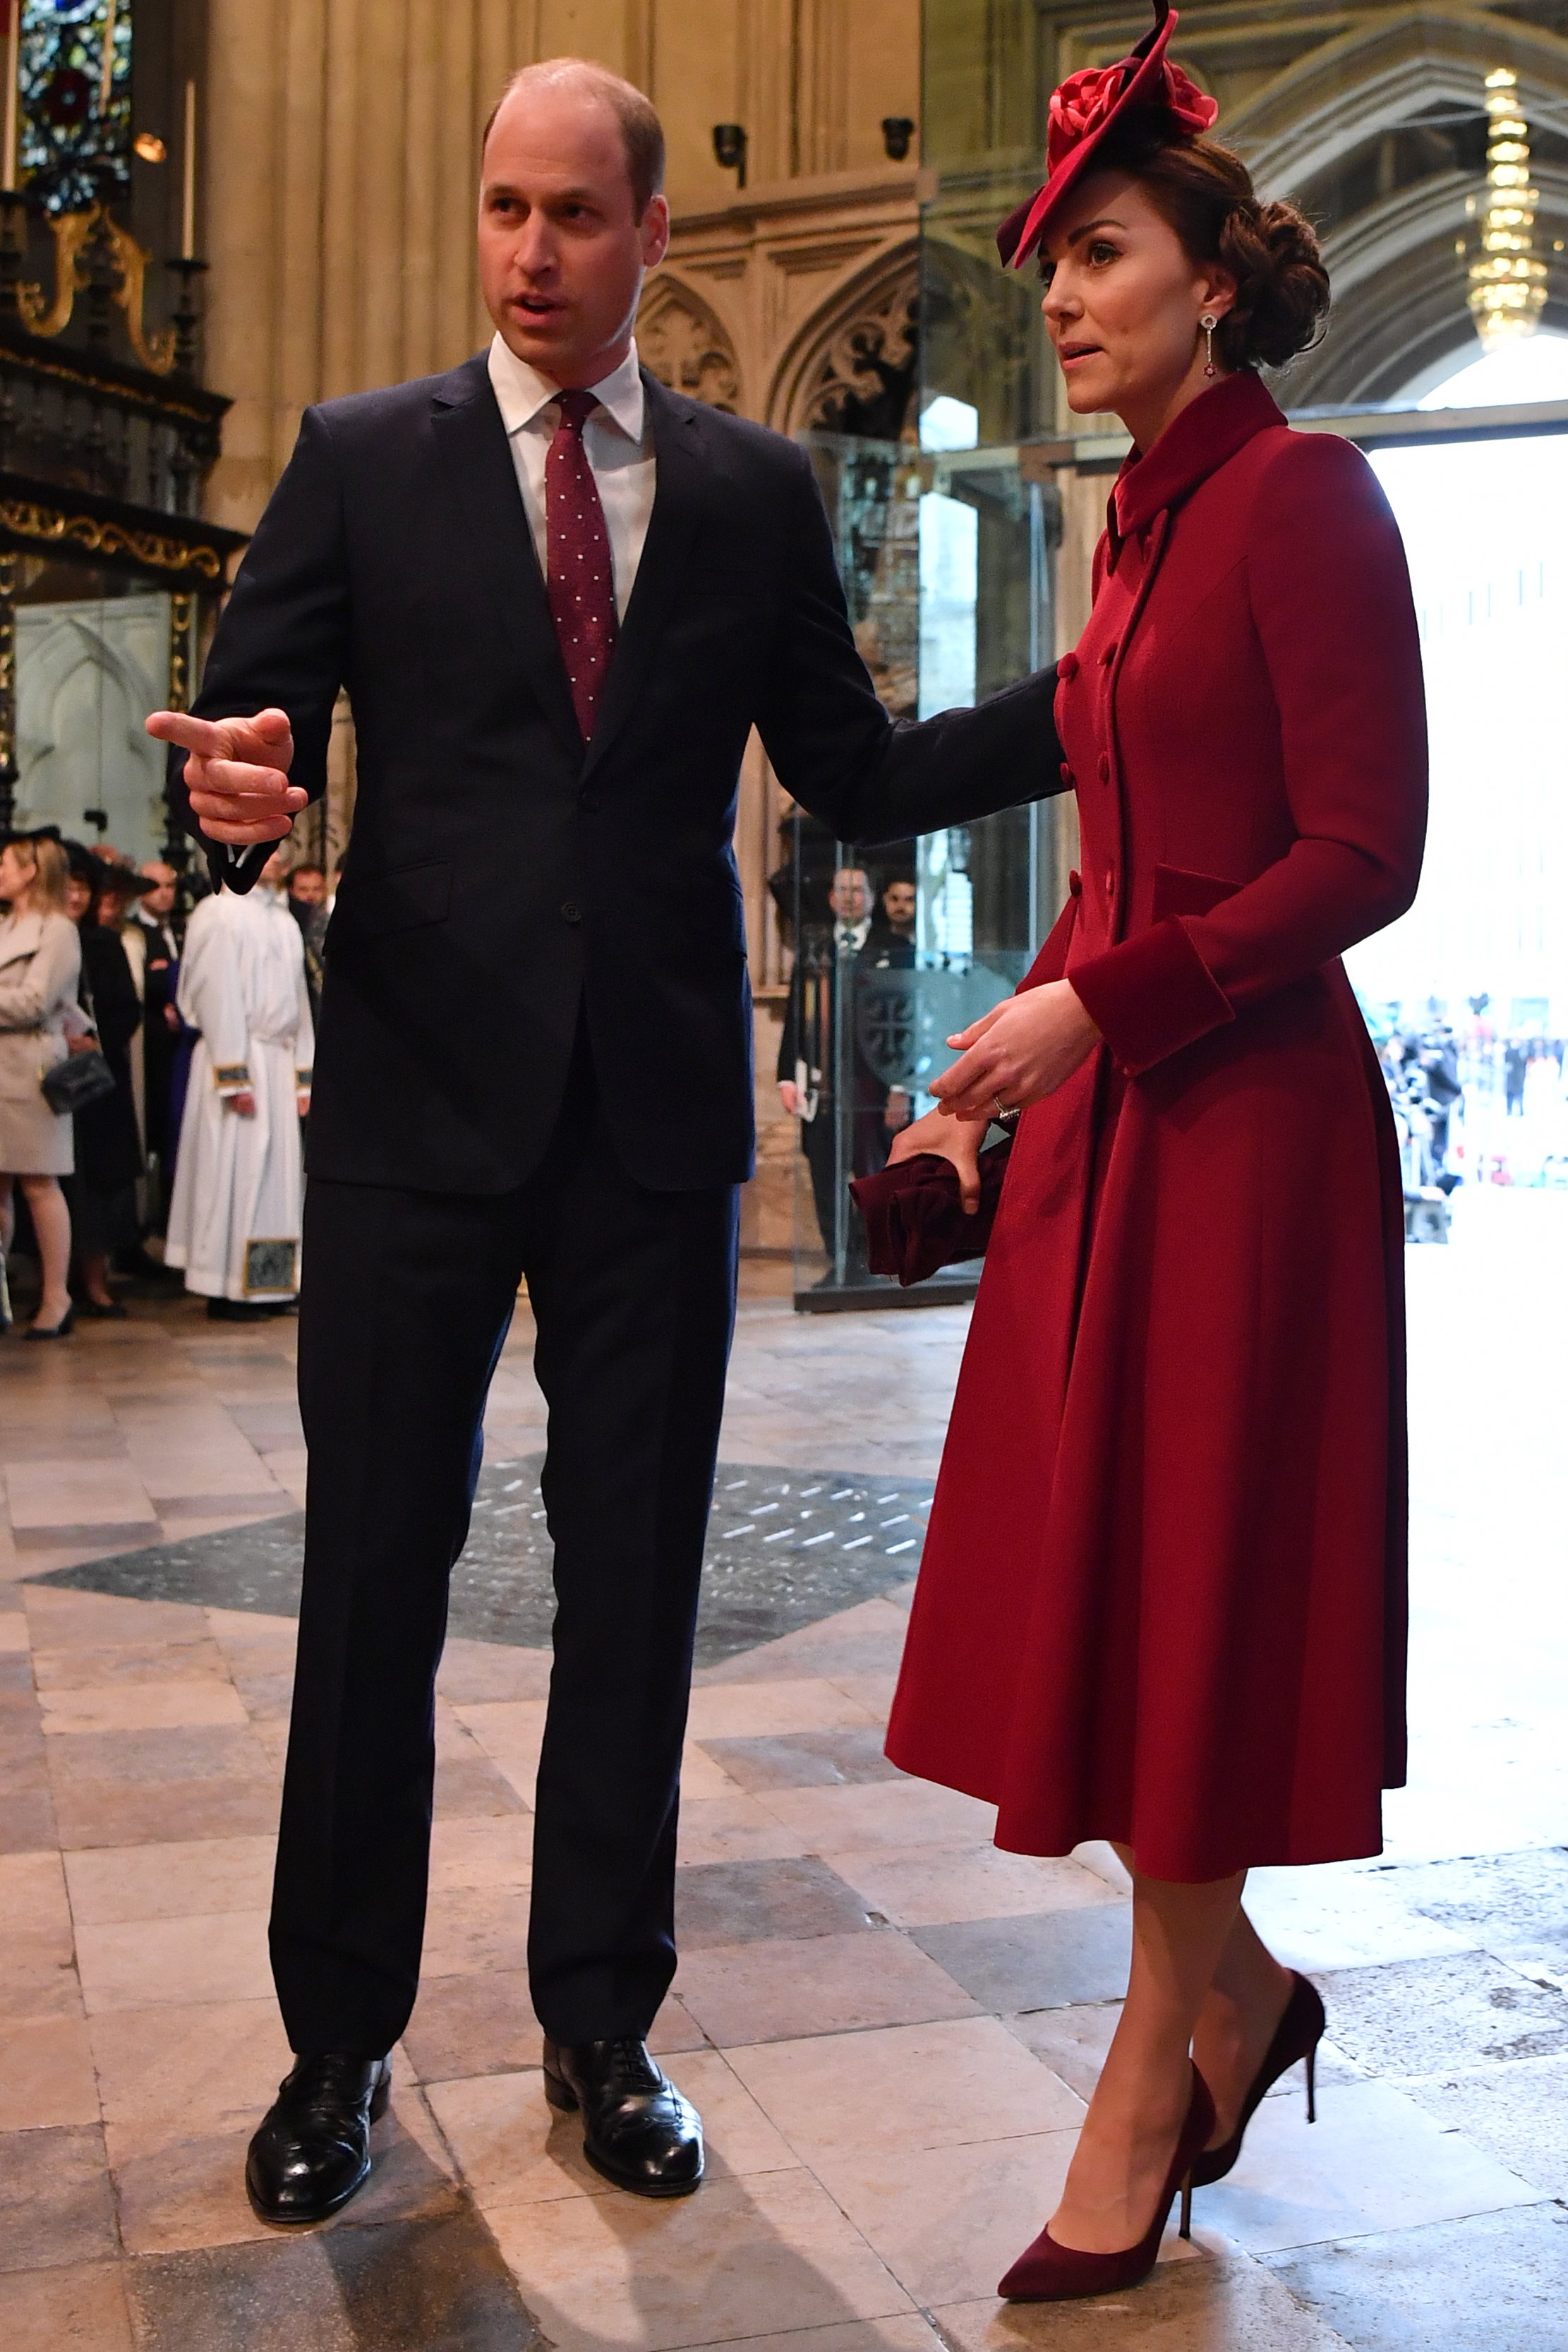 Prince William and Duchess Kate Middleton on March 9, 2020, in London, England |Source: Getty Images